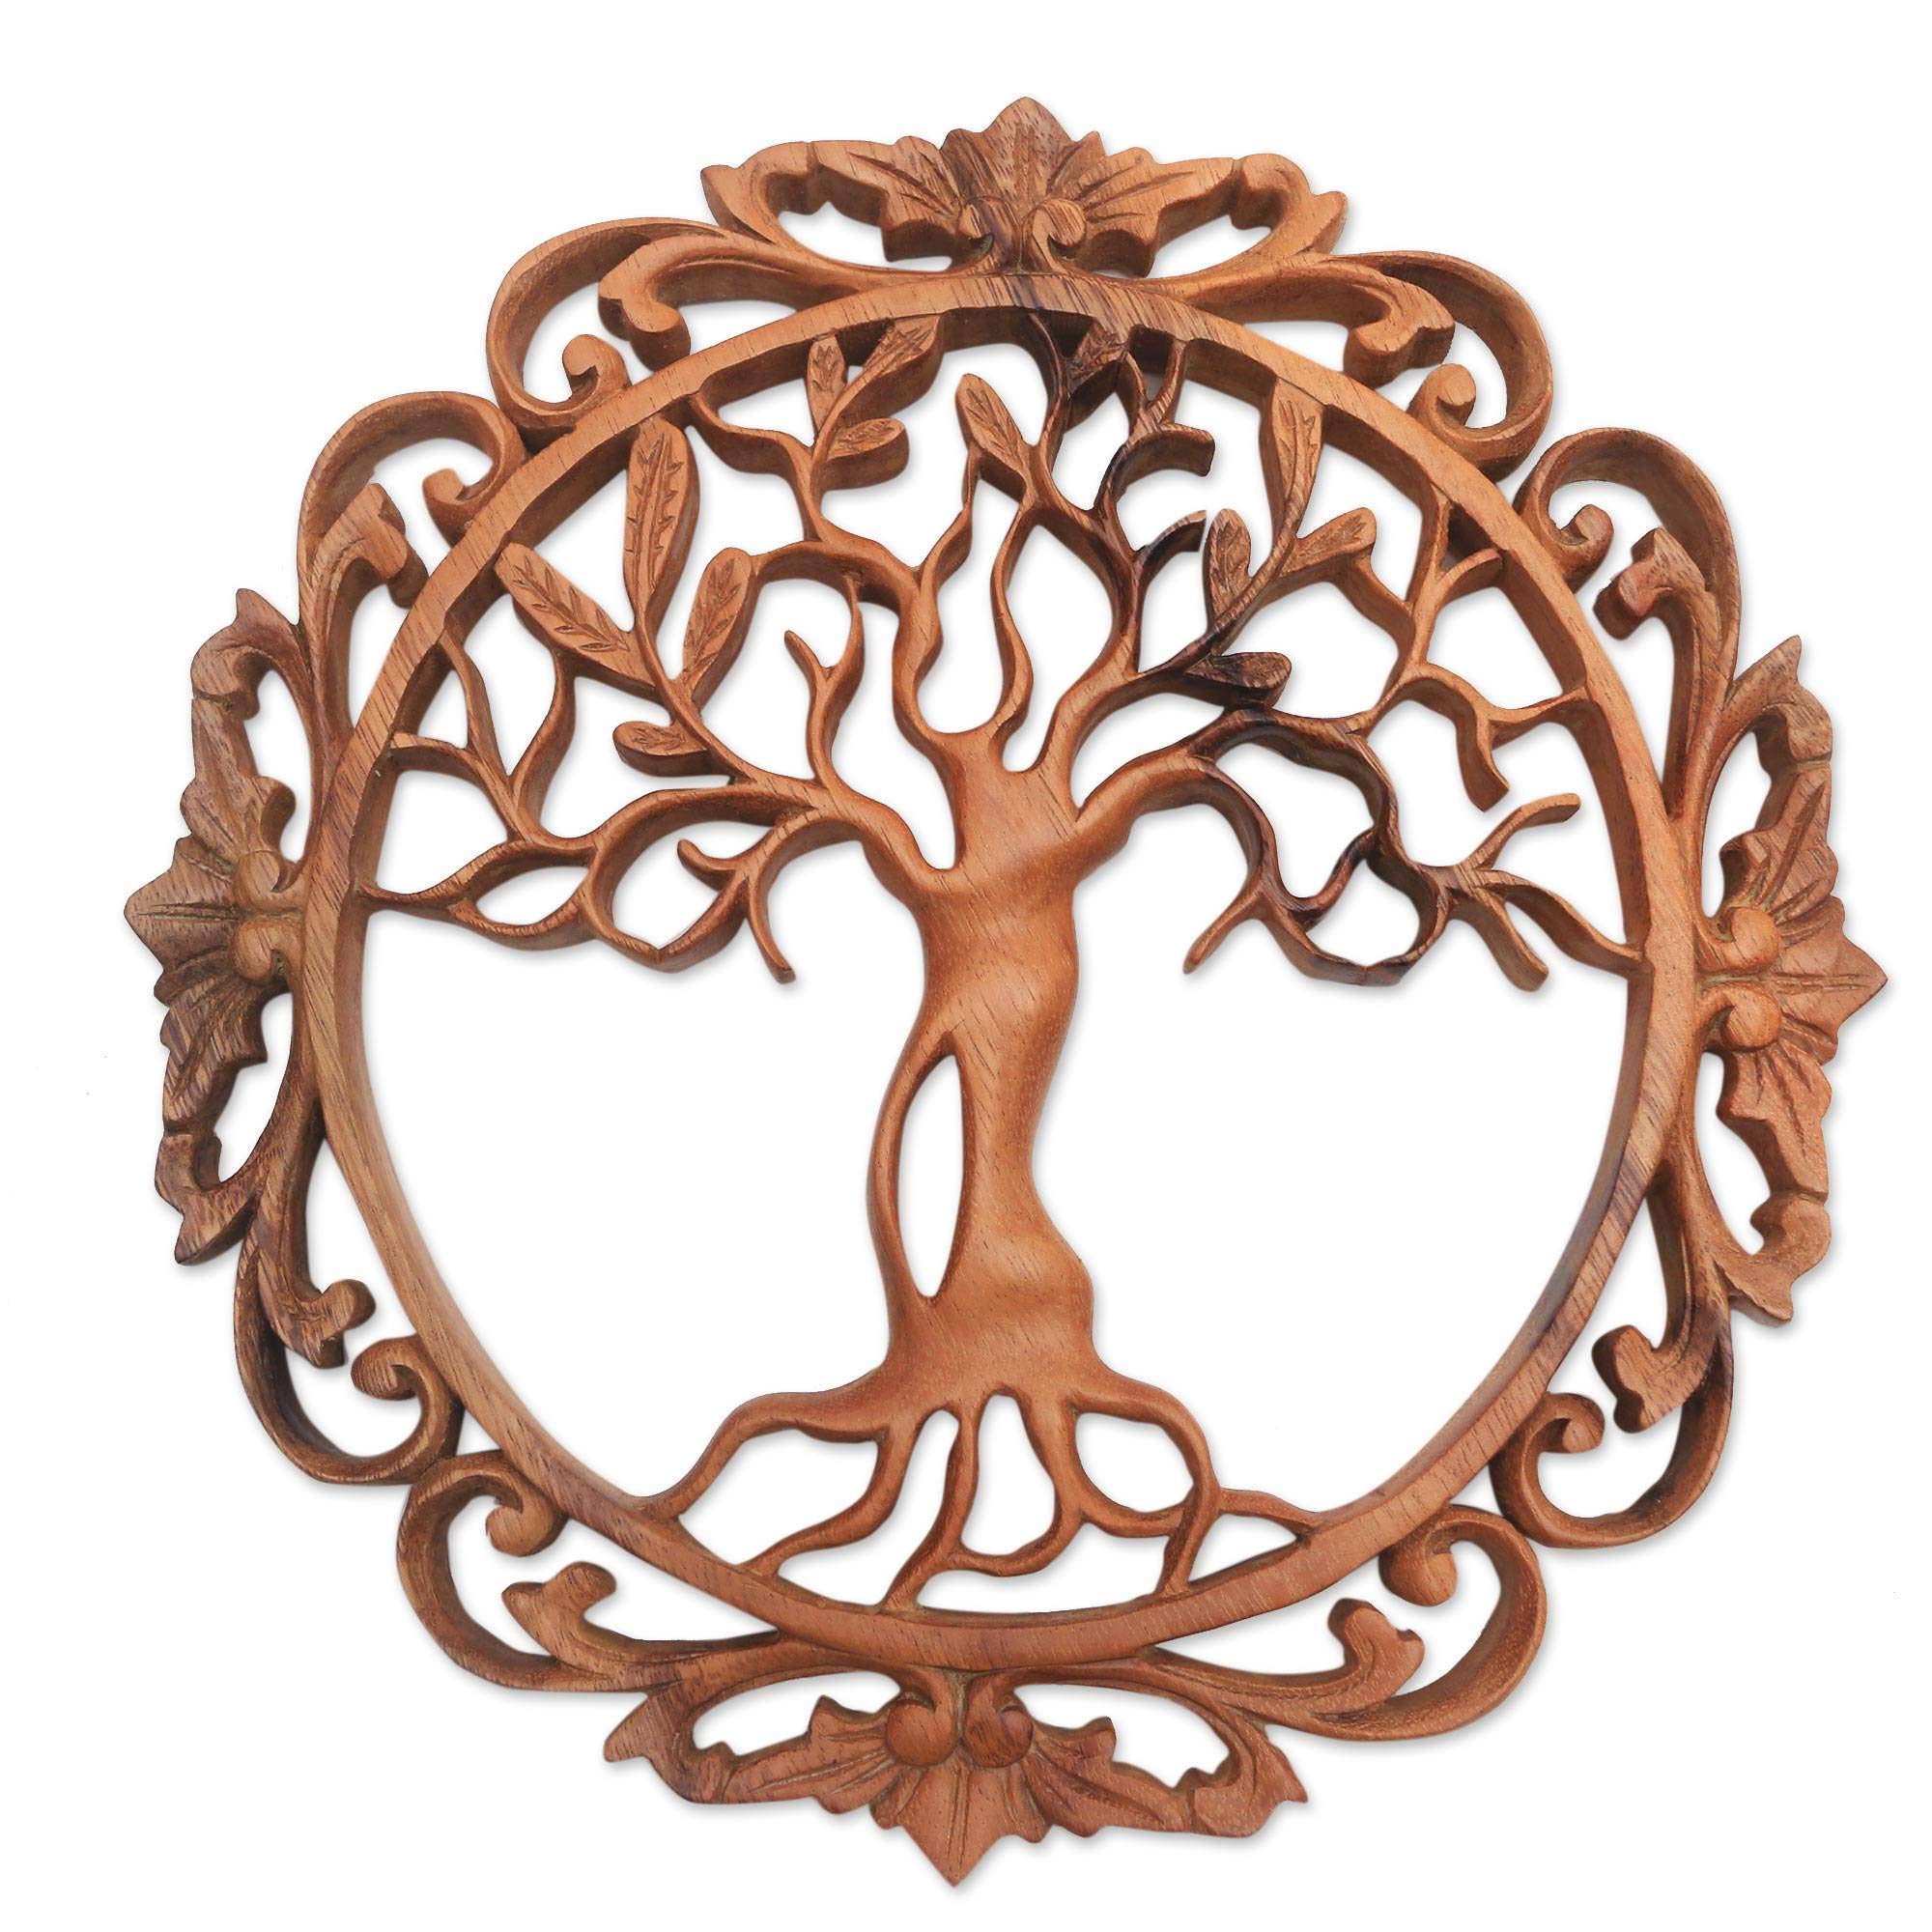 NOVICA Leaf and Tree Wood Relief Panel Wall Sculpture, Brown, Few Leaves'